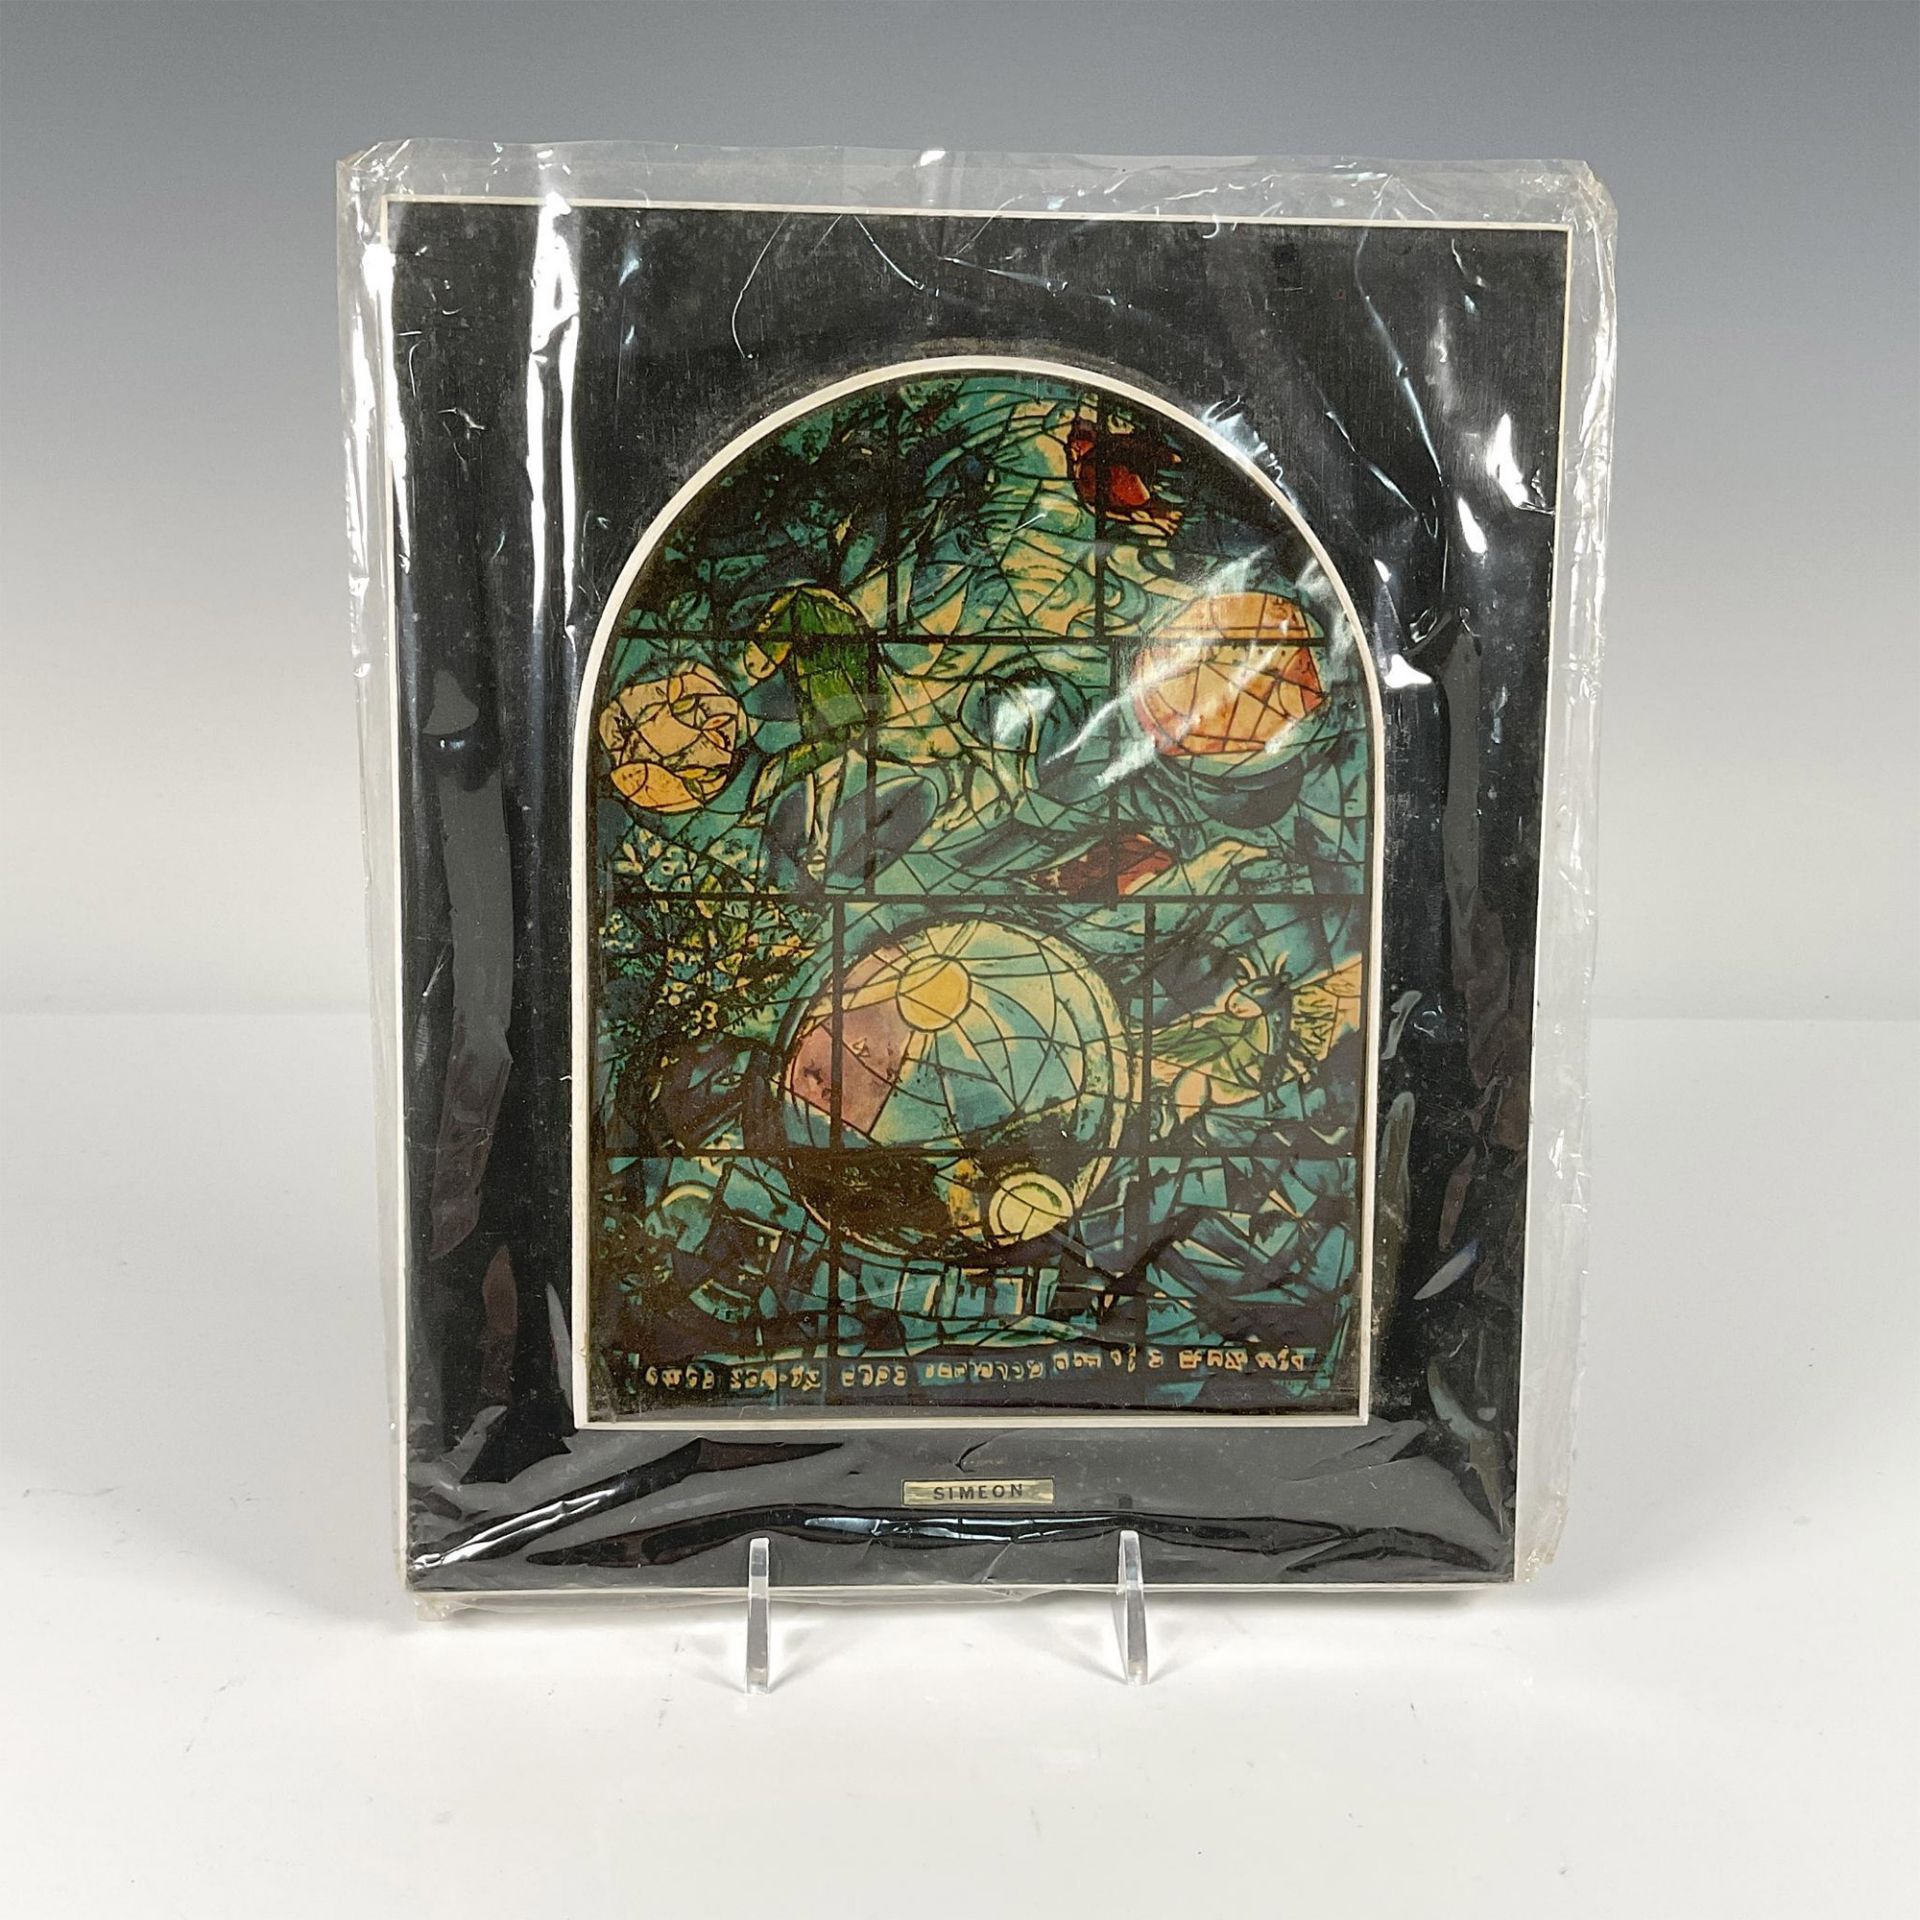 13pc After Marc Chagall by Avissar Wooden Plaques, The 12 Stained Glass Windows - Image 5 of 20